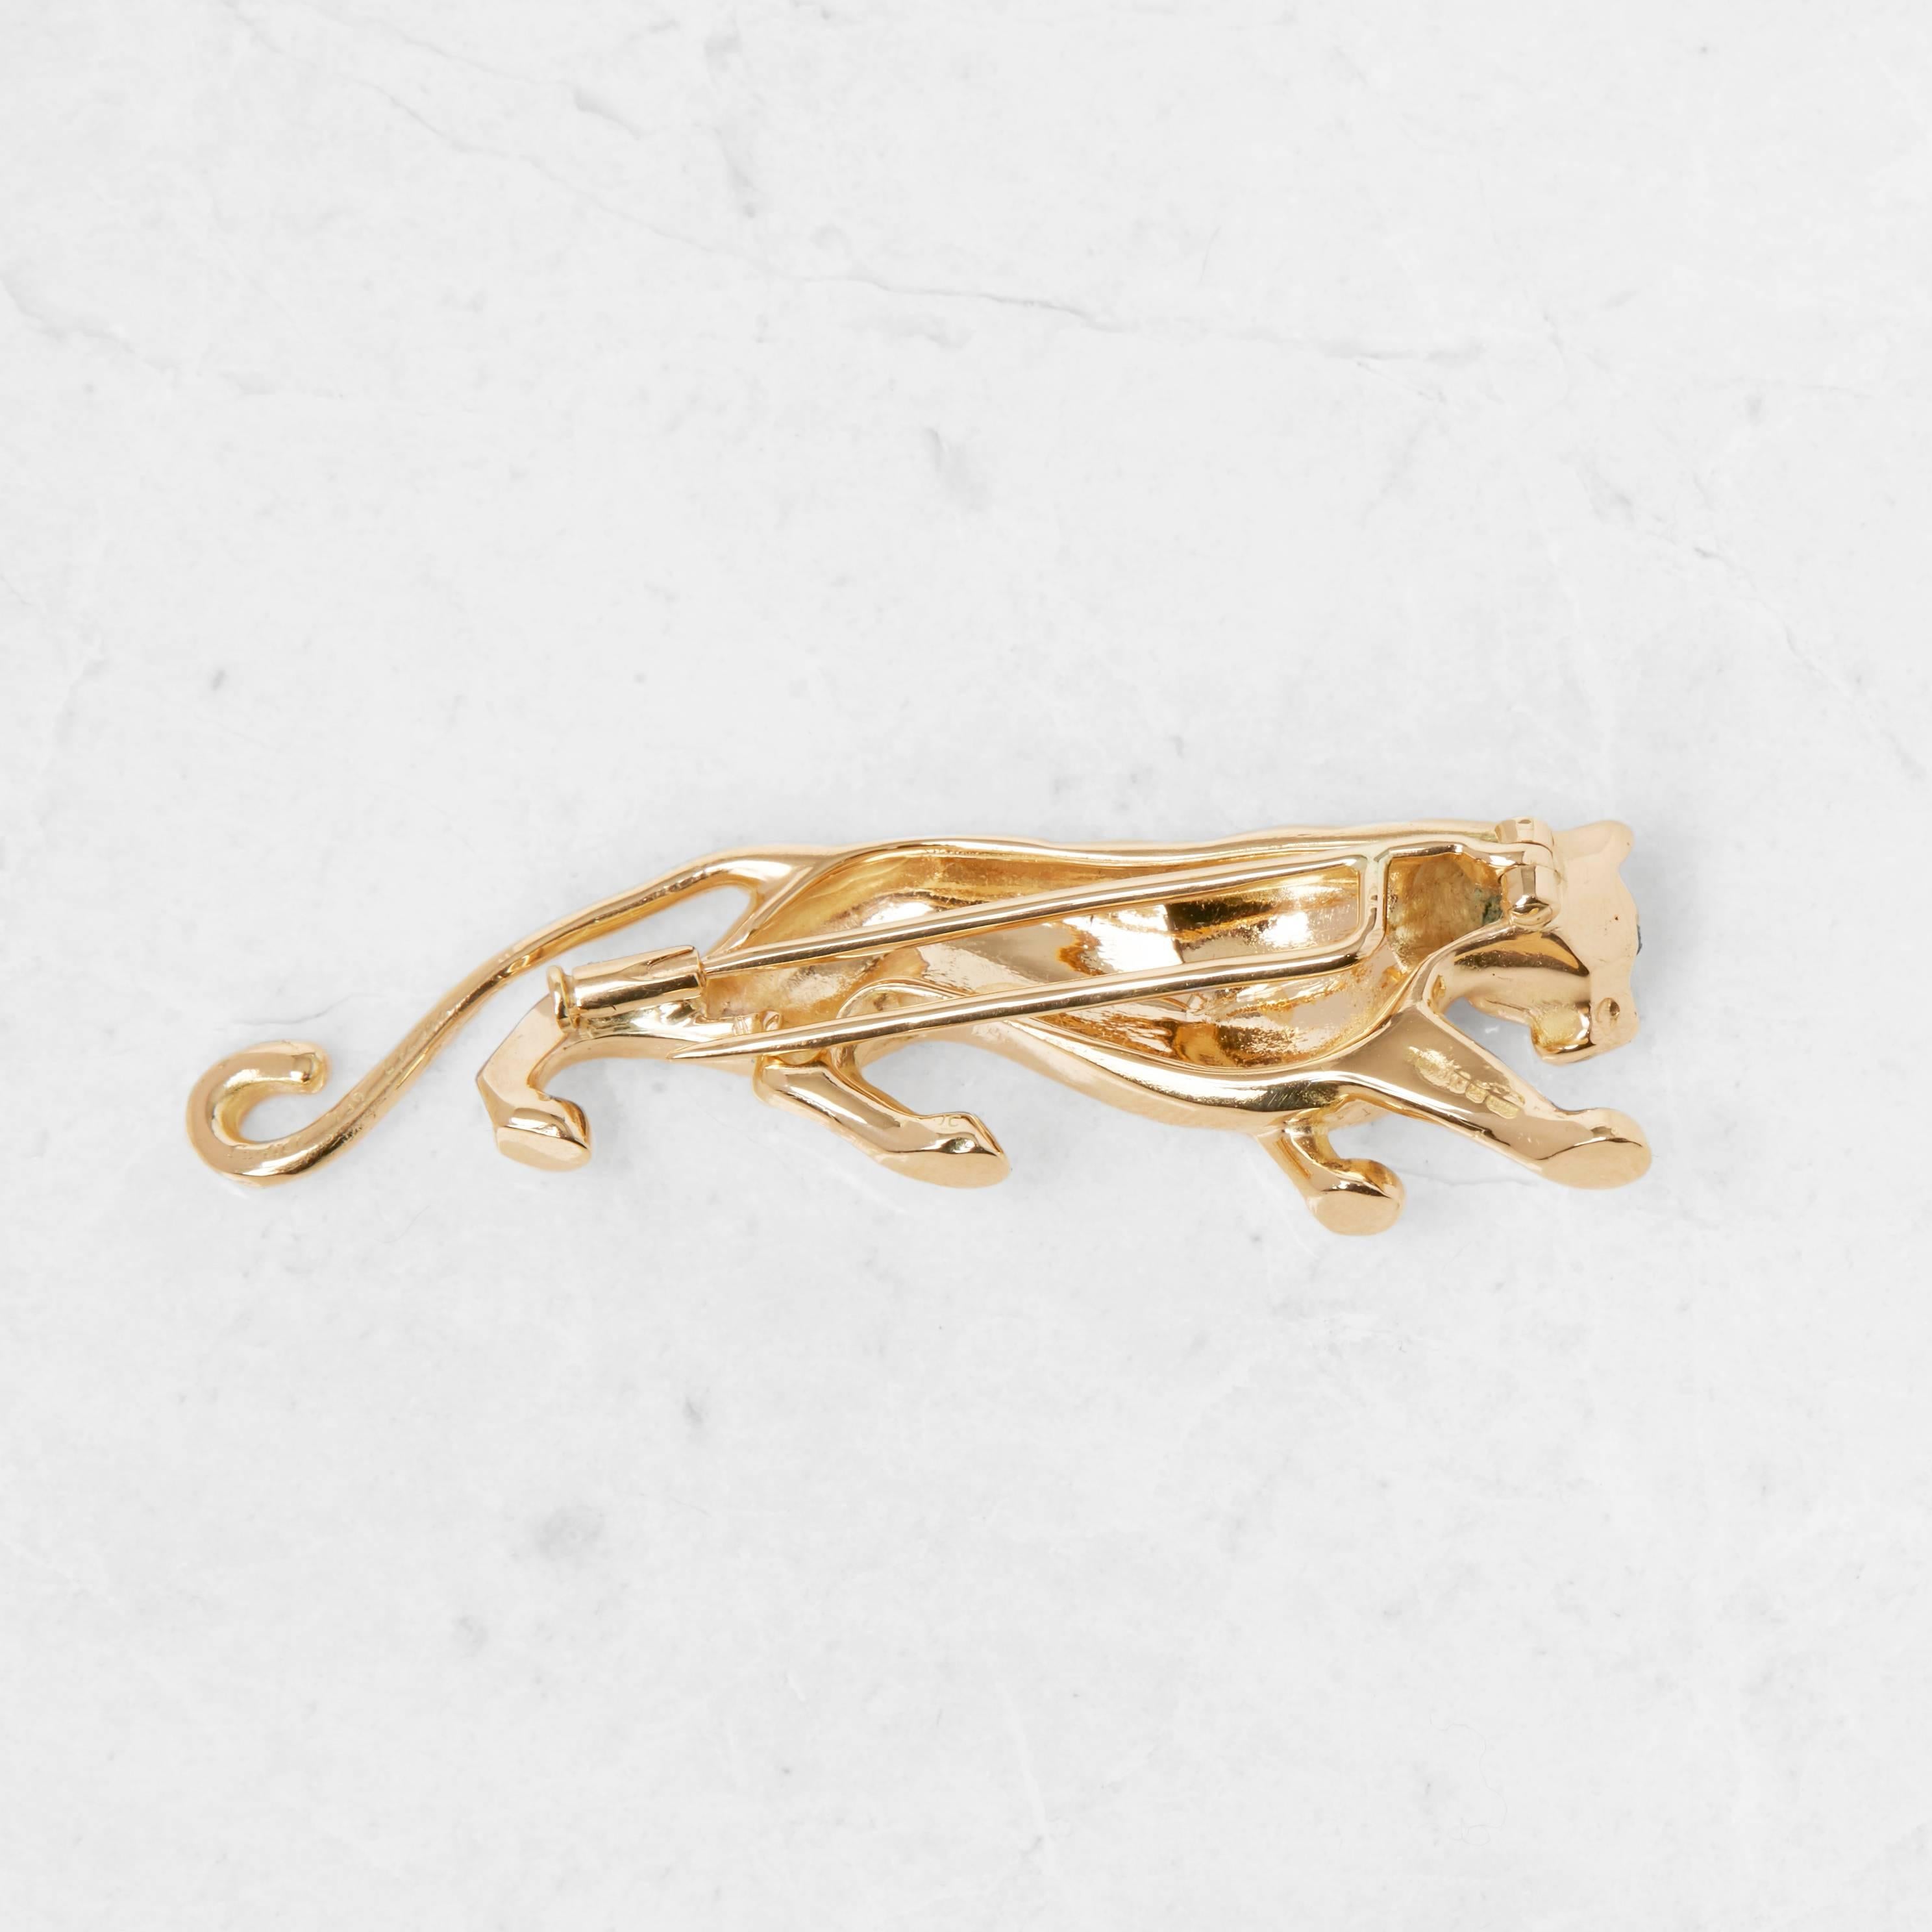 Code: COM1271
Brand: Cartier
Description: 18k Yellow Gold Panthère Brooch
Accompanied With: Pouch & Papers
Gender: Ladies
Brooch Length: 1.5cm
Brooch Width: 5.2cm
Condition: 8.5
Material: Yellow Gold
Total Weight: 14.40g